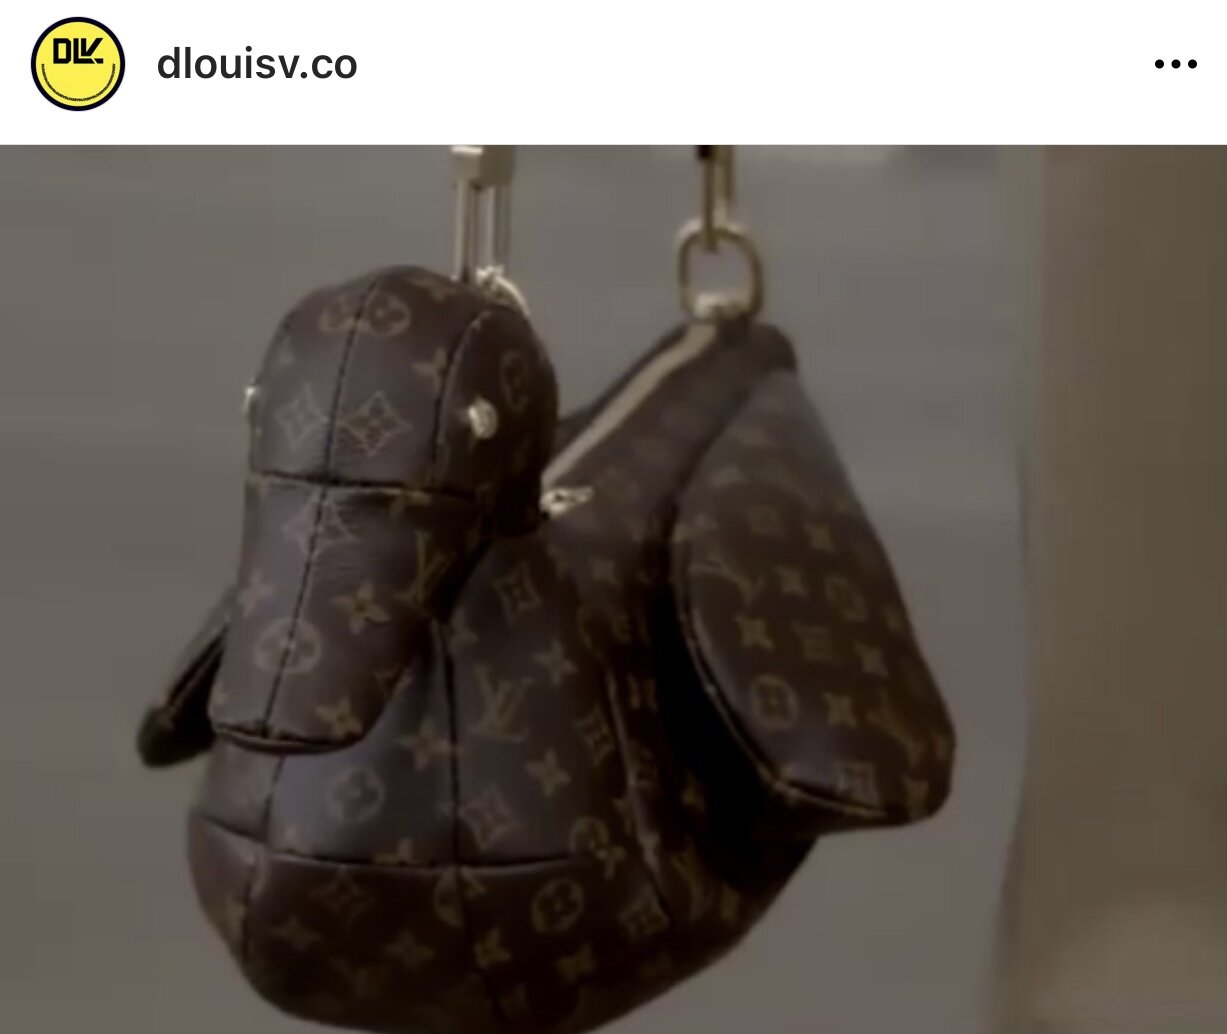 Louis Vuitton launches aeroplane bag that costs US$39,000 - Dimsum Daily